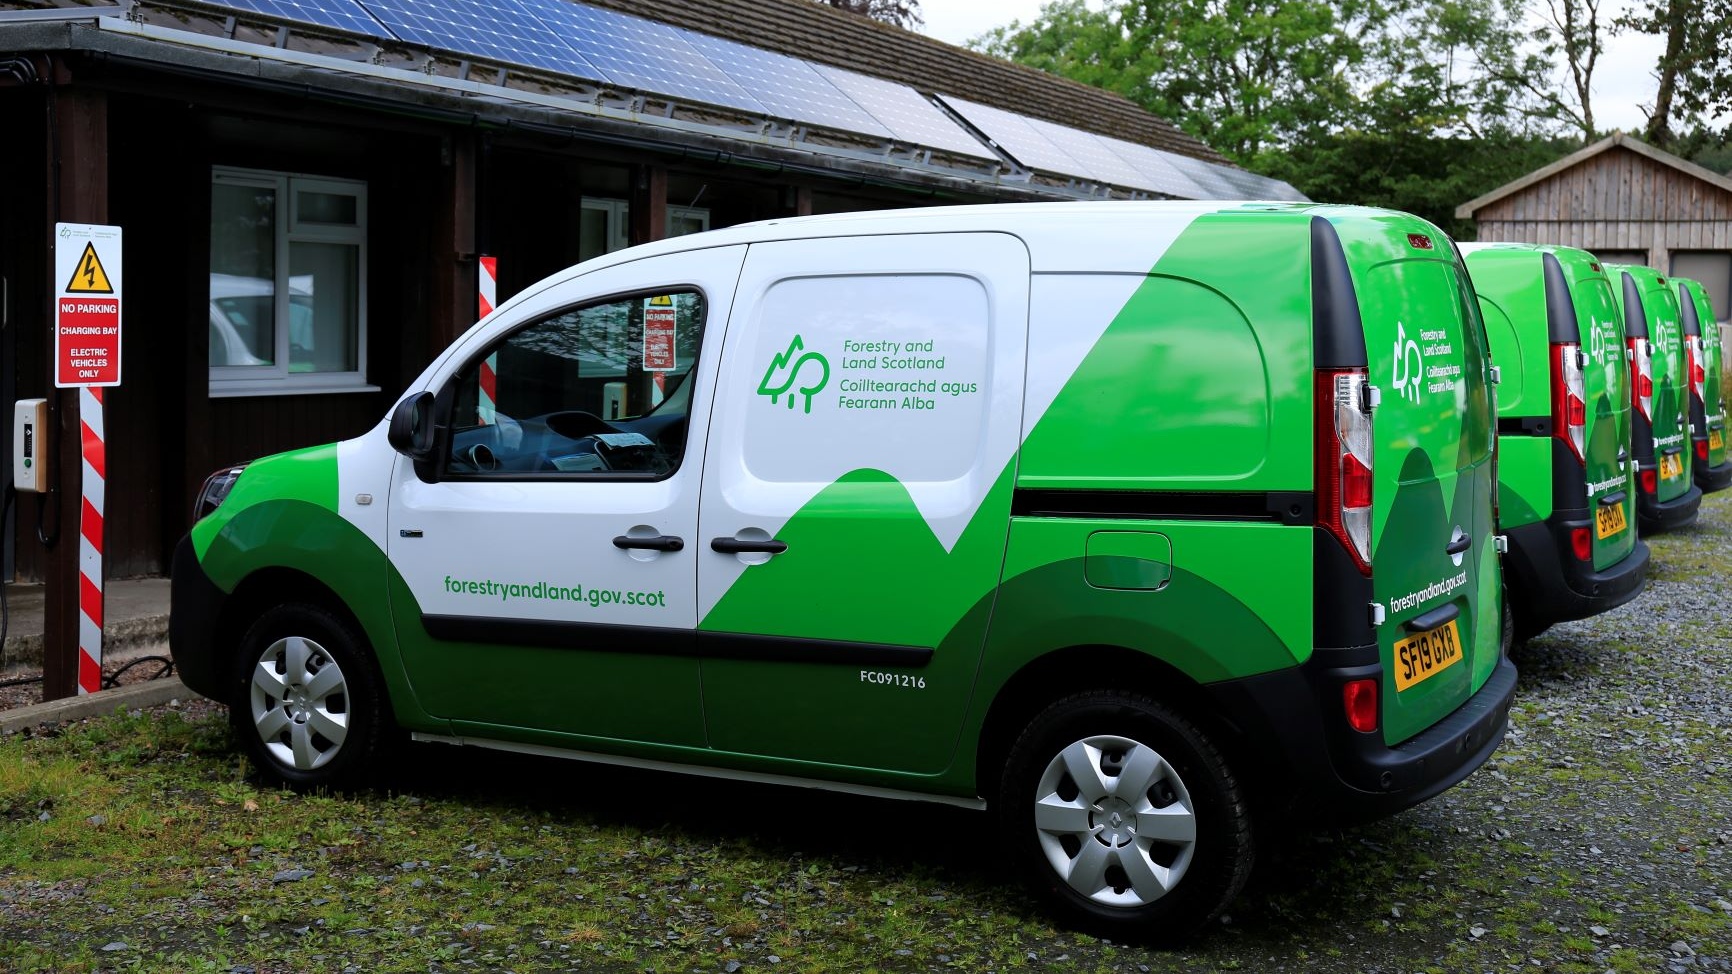 FLS branded electric vehicle in green and white at a charging station